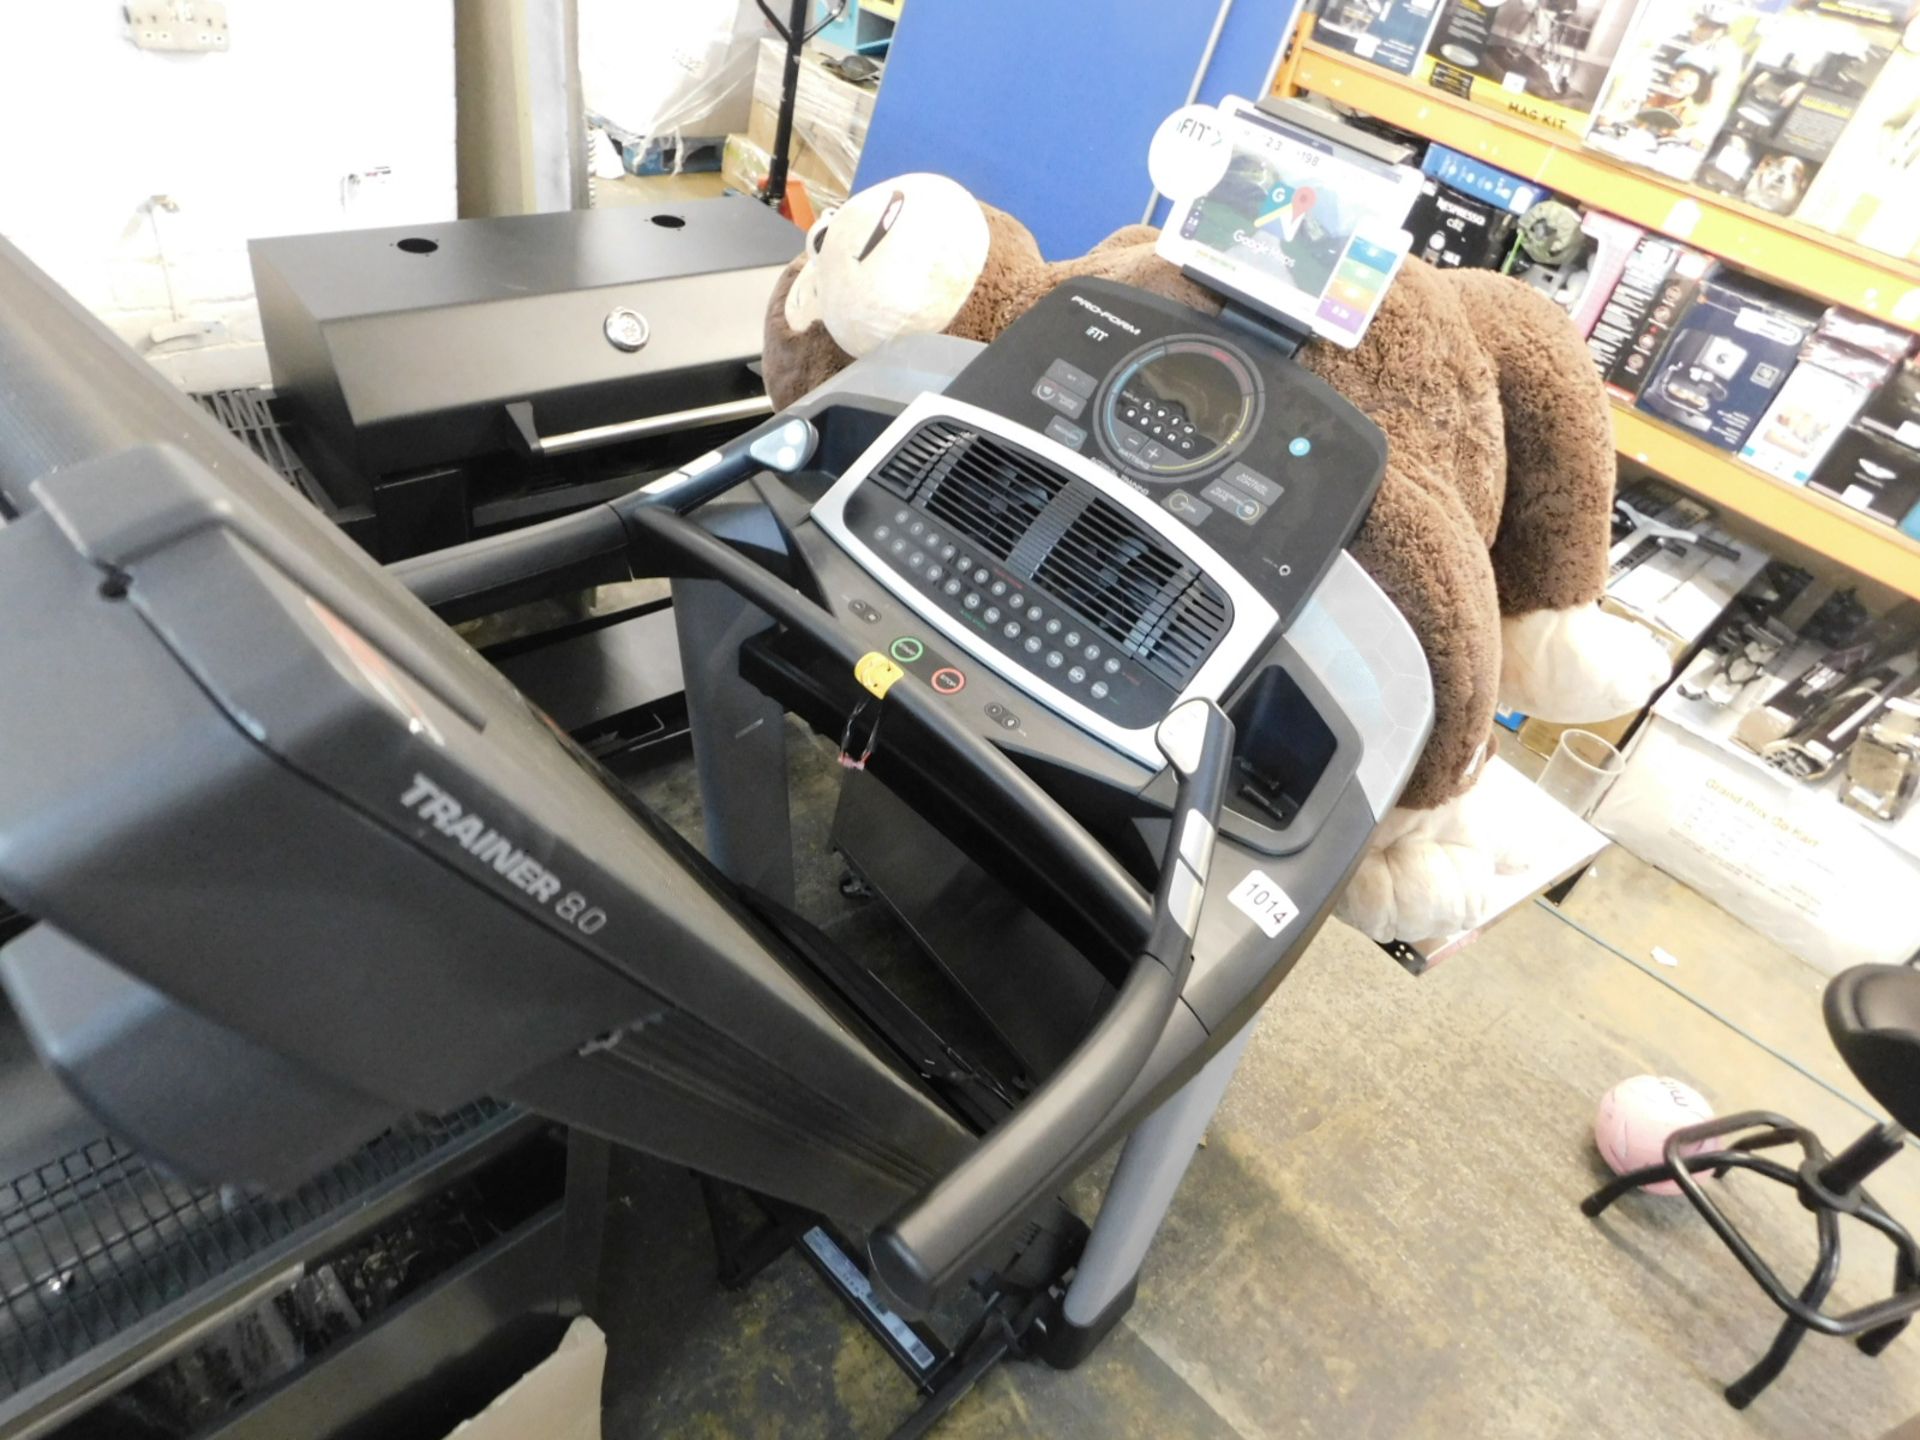 1 PROFORM 8.0 TRAINER TREADMILL RRP £899 (POWERS ON/WORKING)